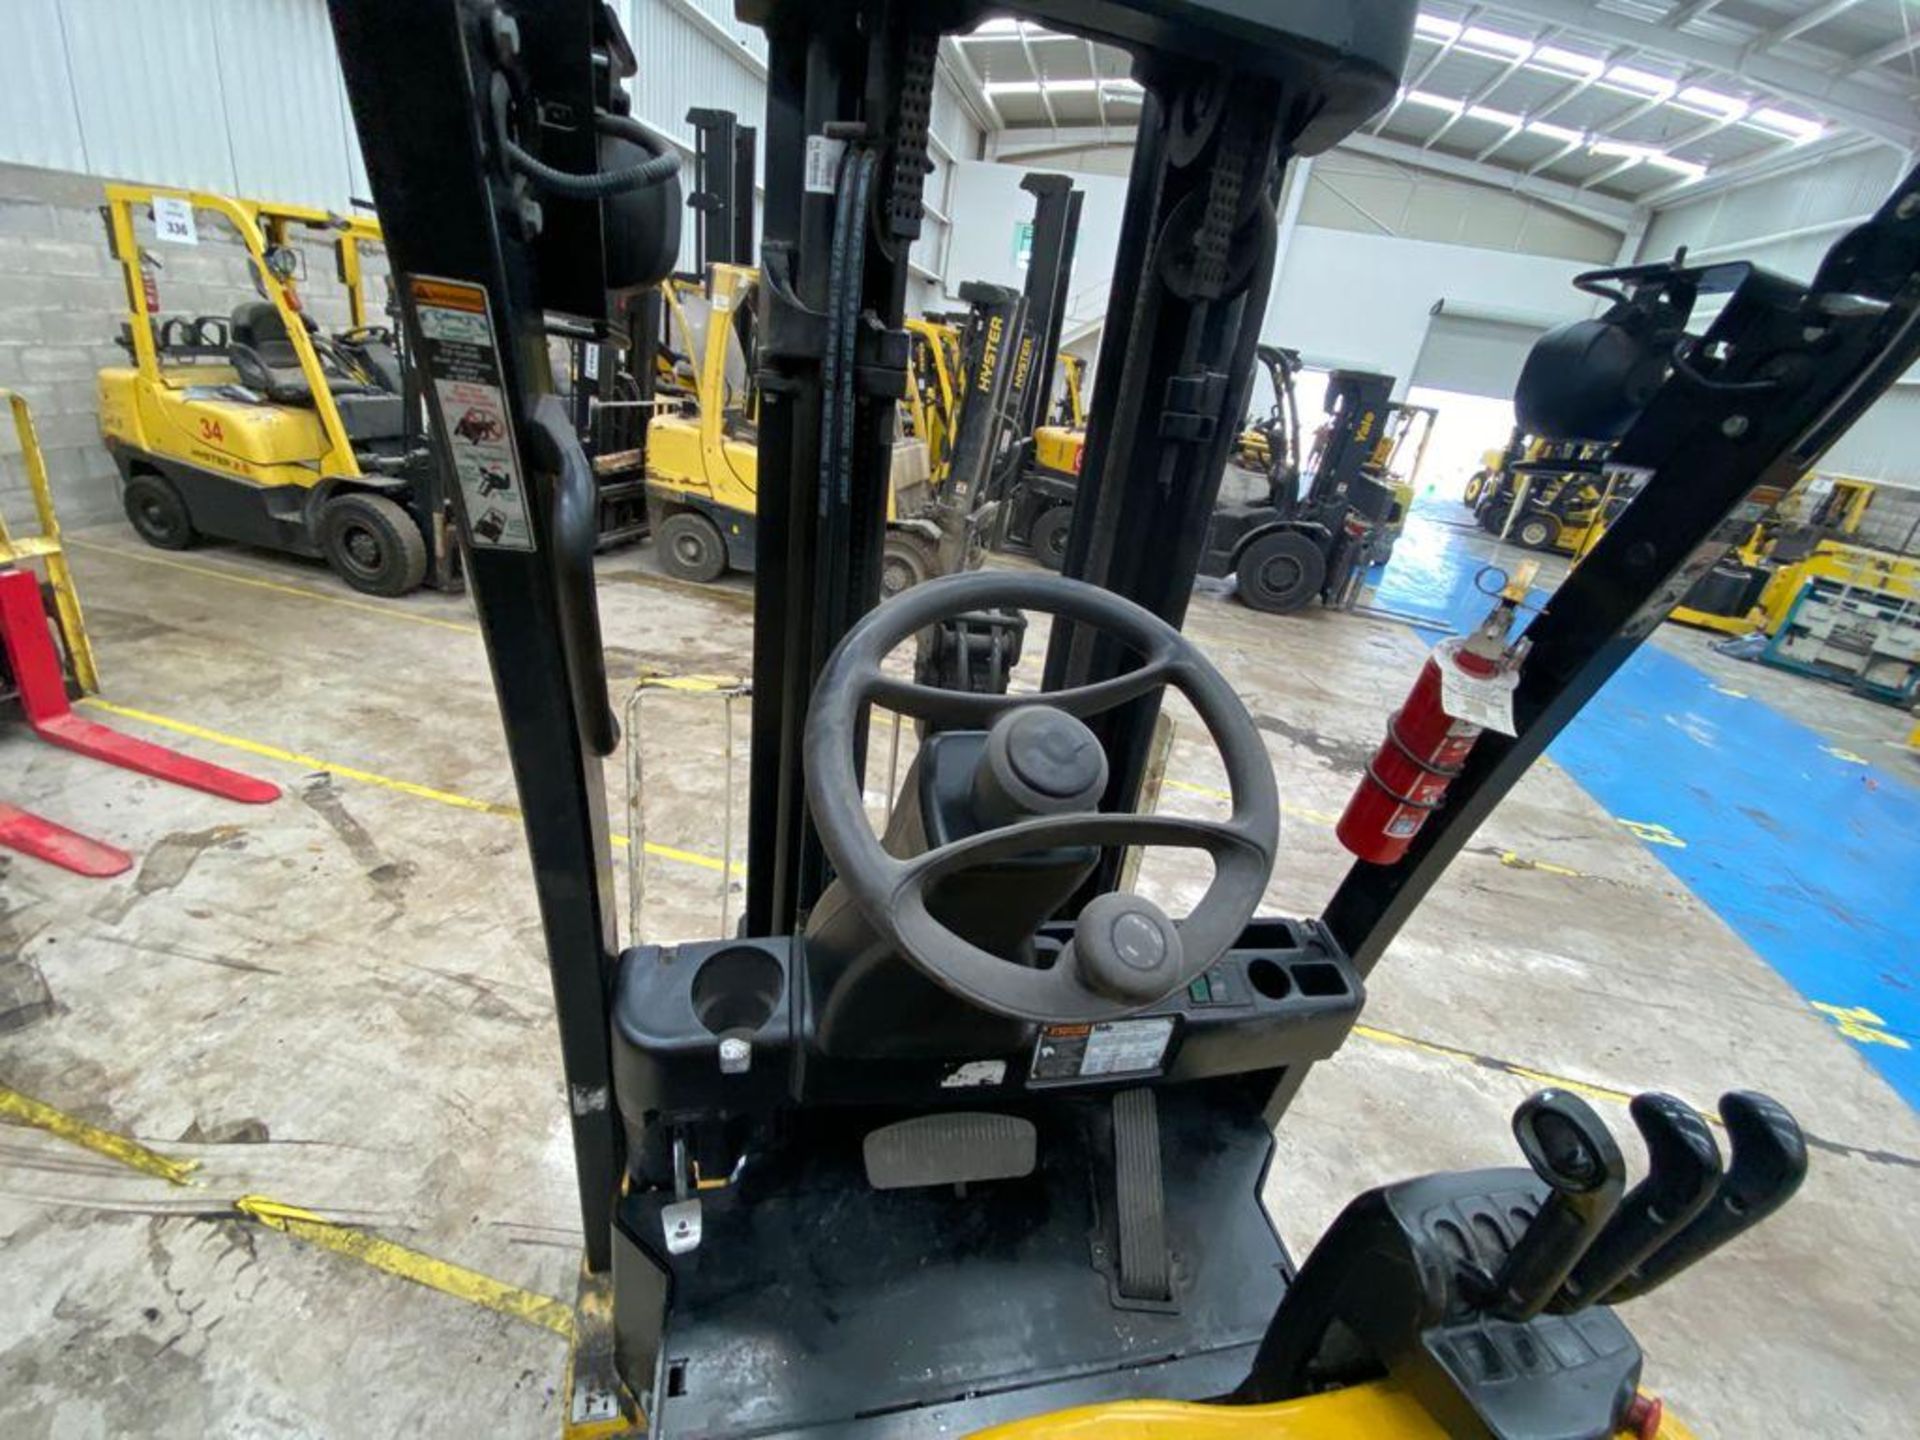 Yale Electric Forklift, Model ERC060VGN36TE088, S/N A968N17882R, Year 2017, 5800 lb capacity - Image 27 of 44